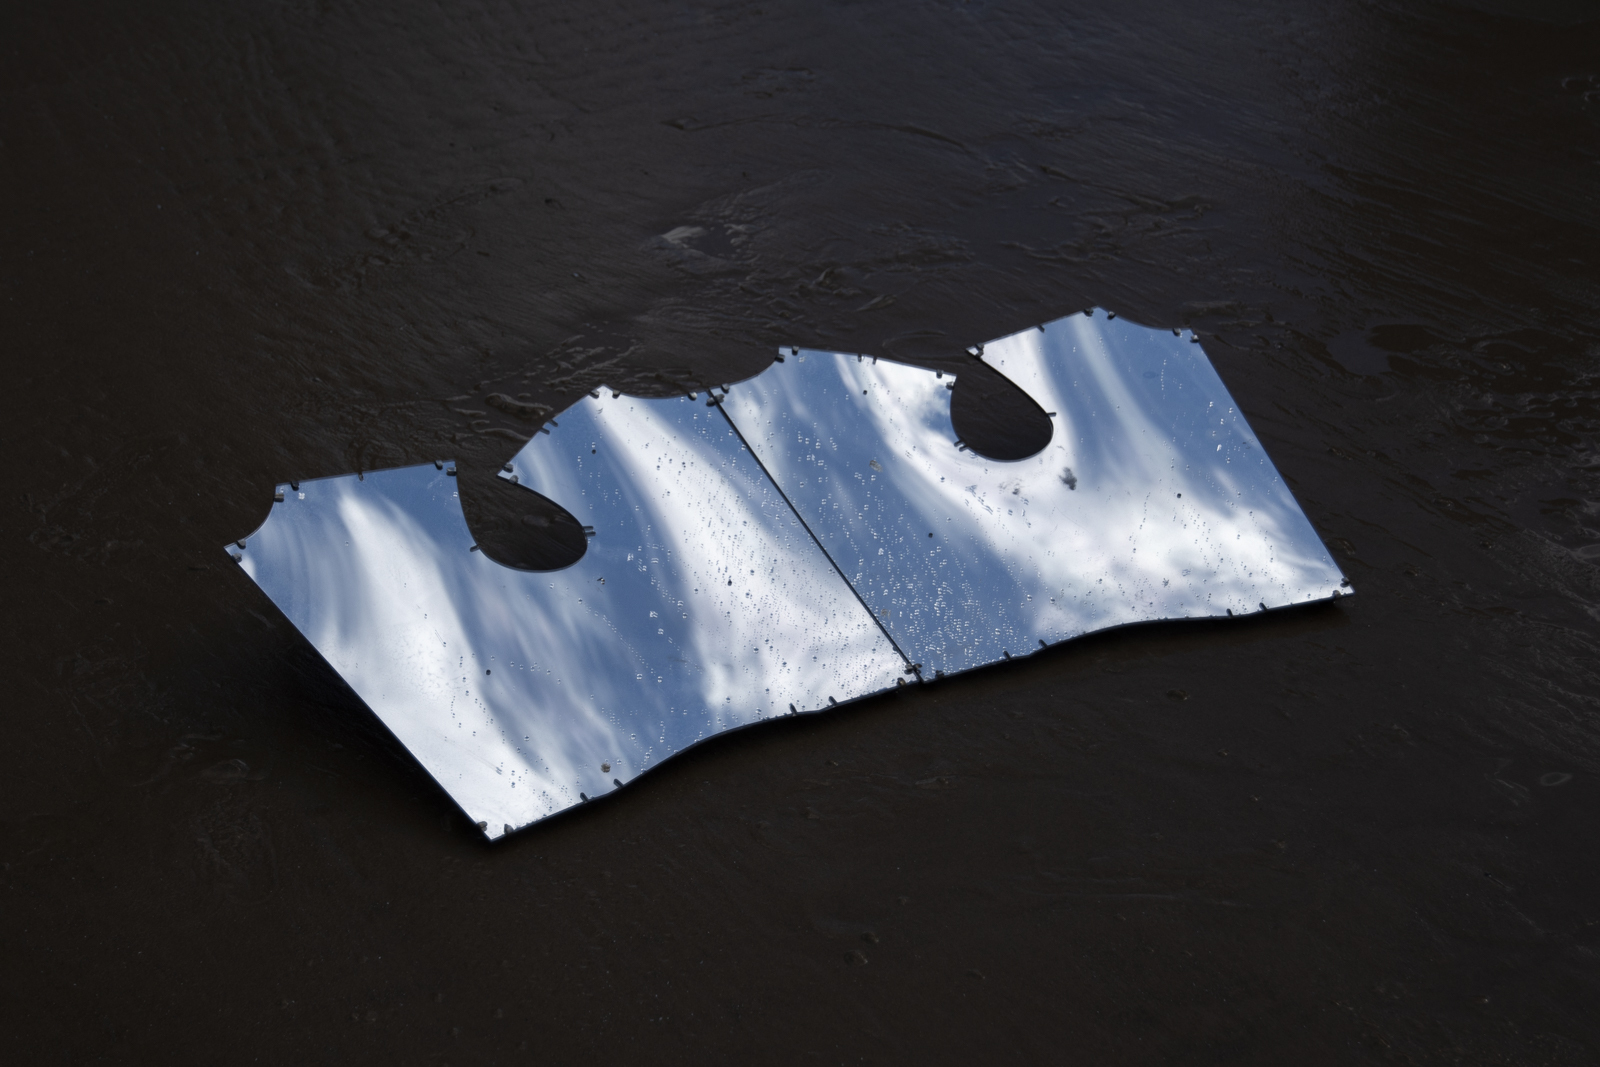 A wet mirror is angled on the beach such that the sky and clouds can be seen in its reflection. The wetness and shape of the mirror distorts the image.